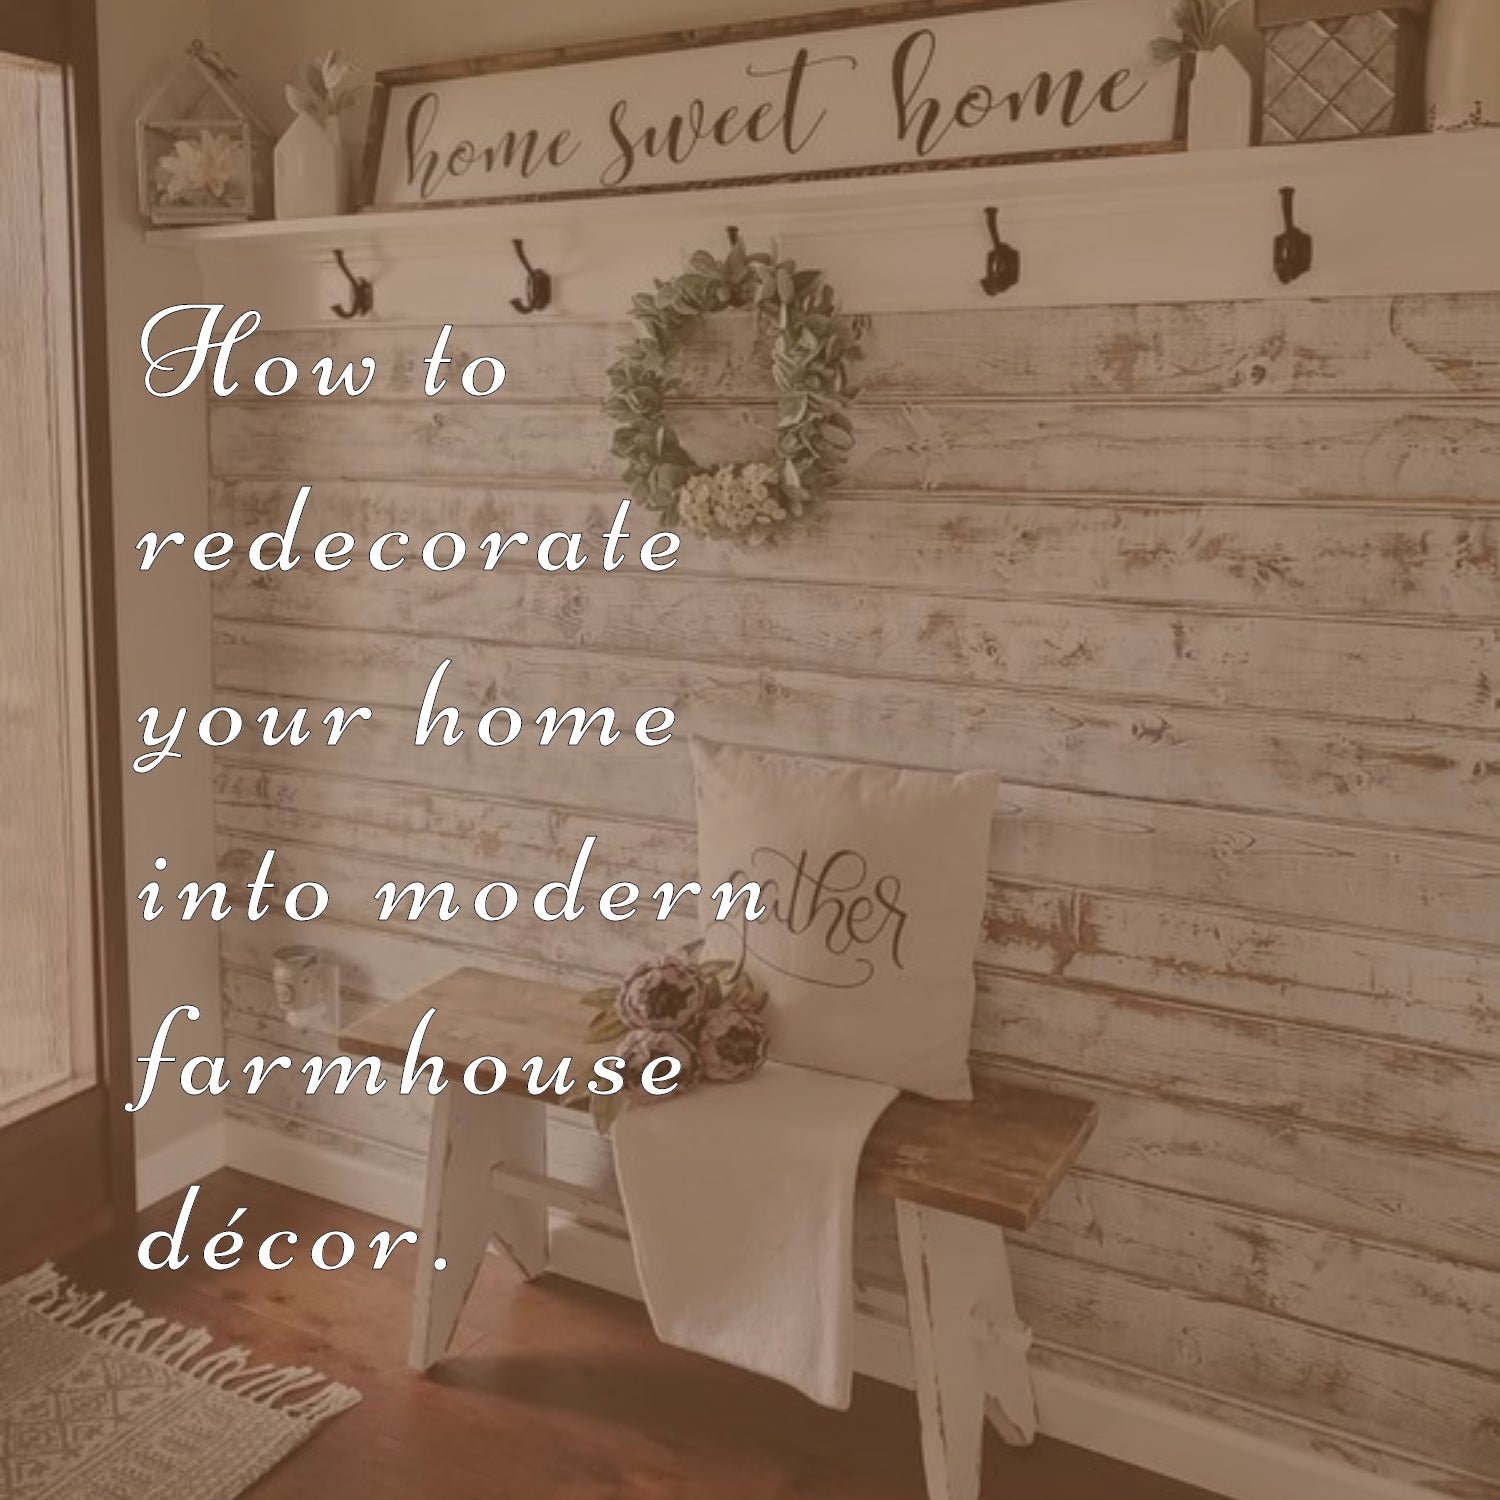 How to redecorate your home into modern farmhouse décor.